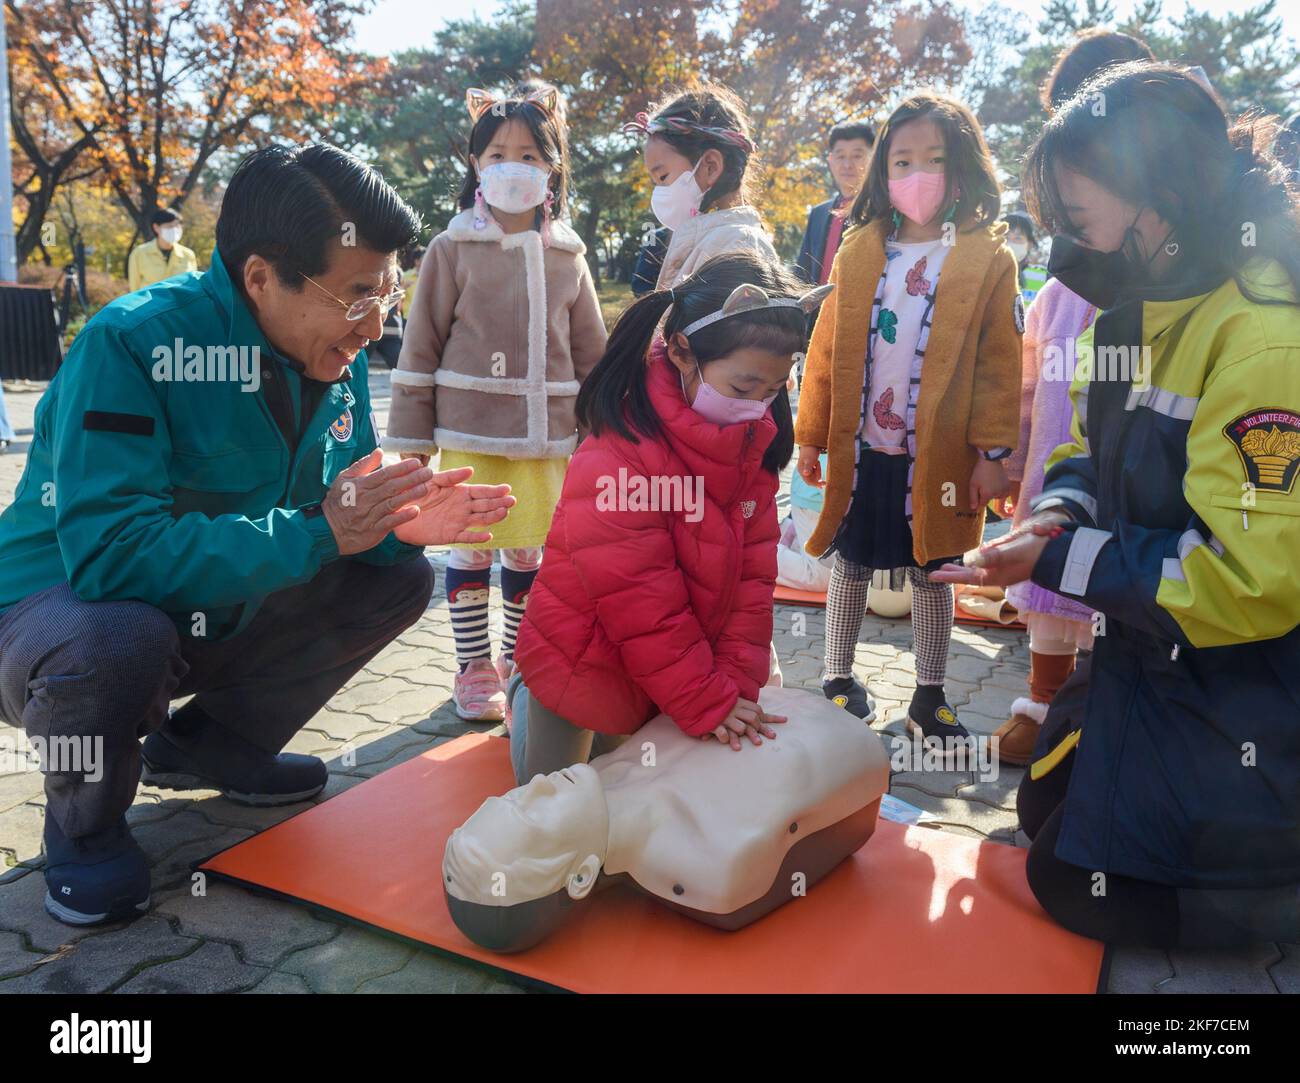 Seo Kang-suk, head of Songpa-gu District Office, encourages kindergarten students CPR training part of Safe Korea drill at a park in Seoul. The 2022 Safe Korea Training is a session to check the disaster response system nationwide from November 14 to 25 for a total of 1,433 training sessions at 300 central ministries, local governments, and public institutions. Stock Photo